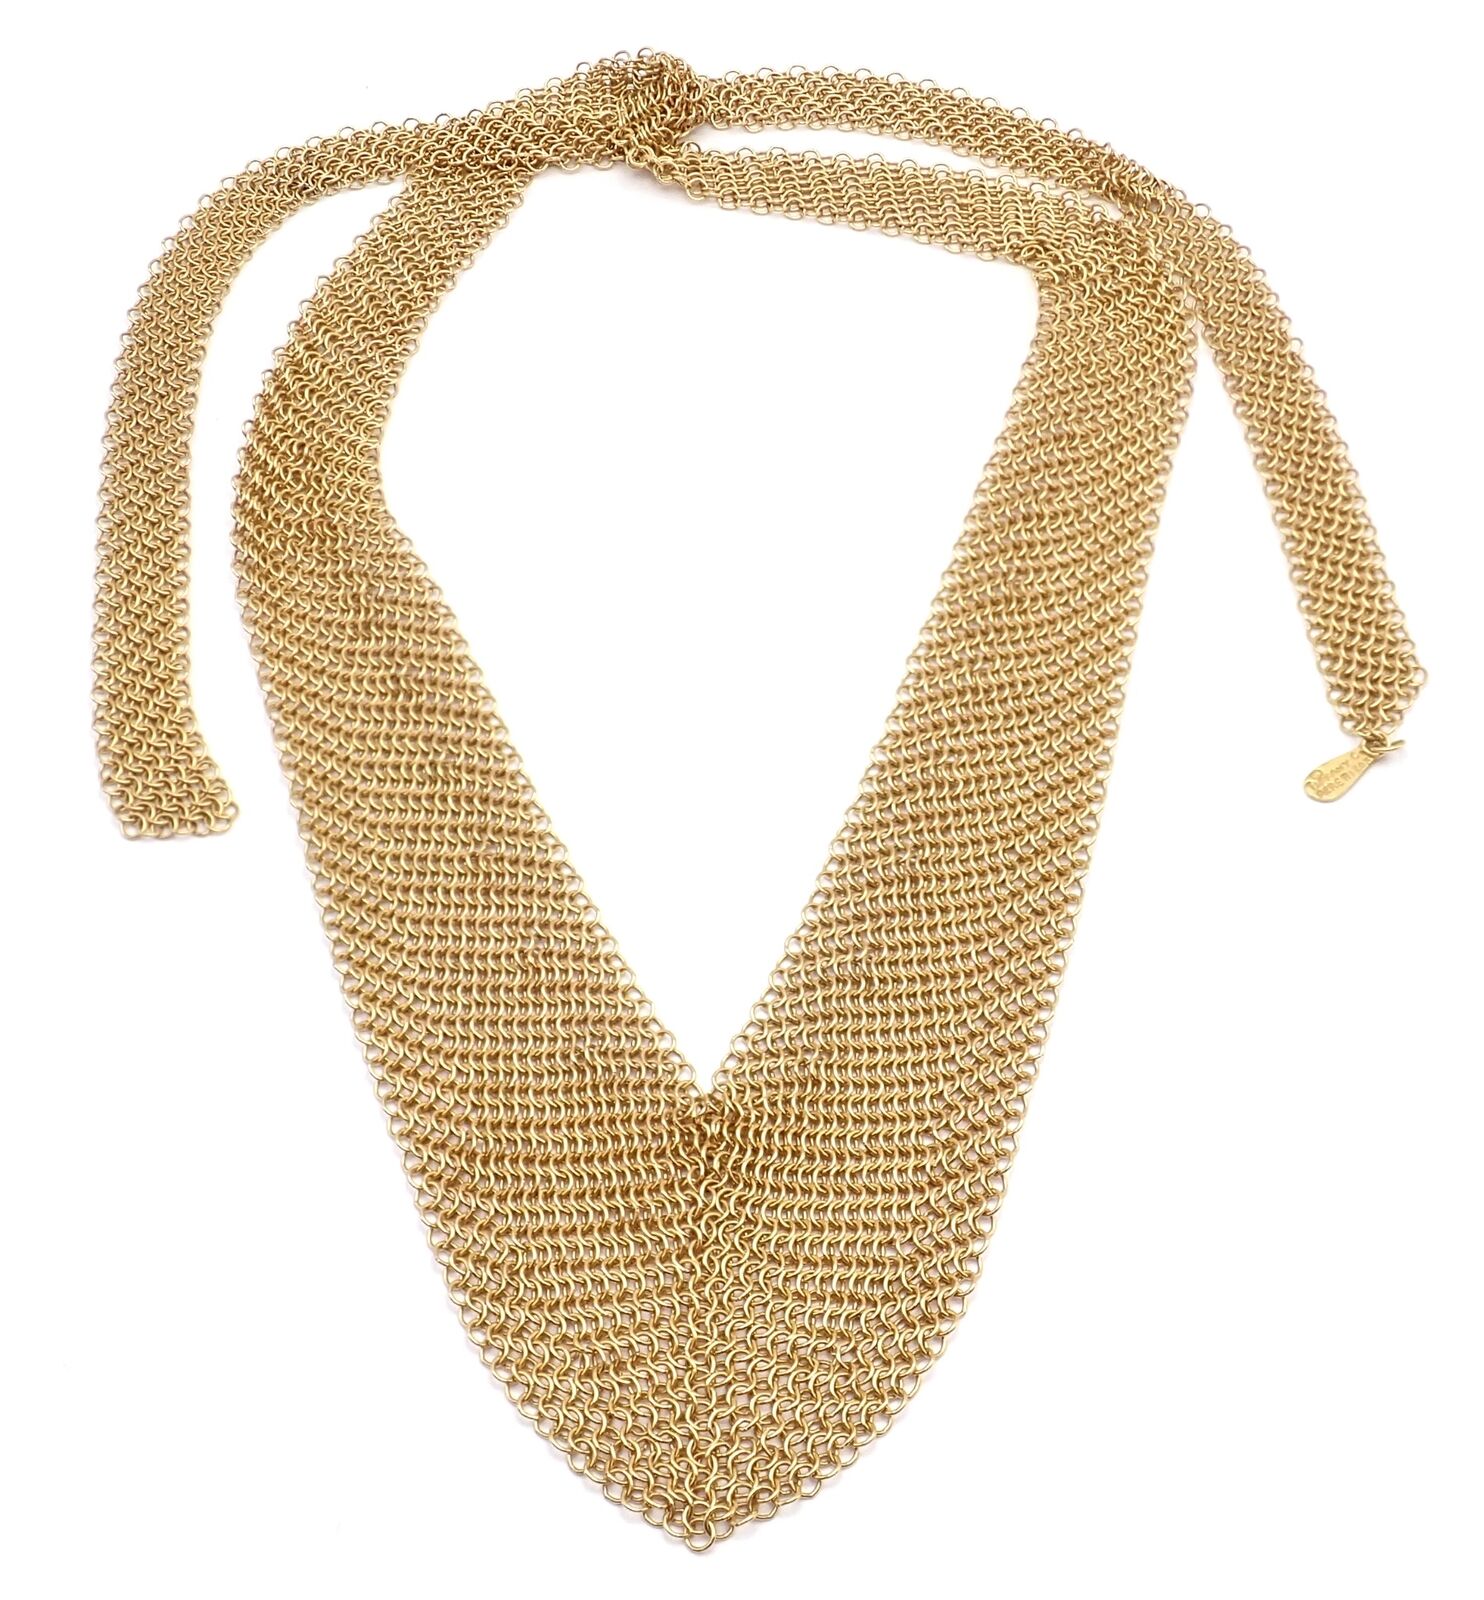 Tiffany & Co. Jewelry & Watches:Fine Jewelry:Necklaces & Pendants Vintage! Authentic Tiffany & Co Peretti 20k Yellow Gold Mesh Bib Scarf Necklace